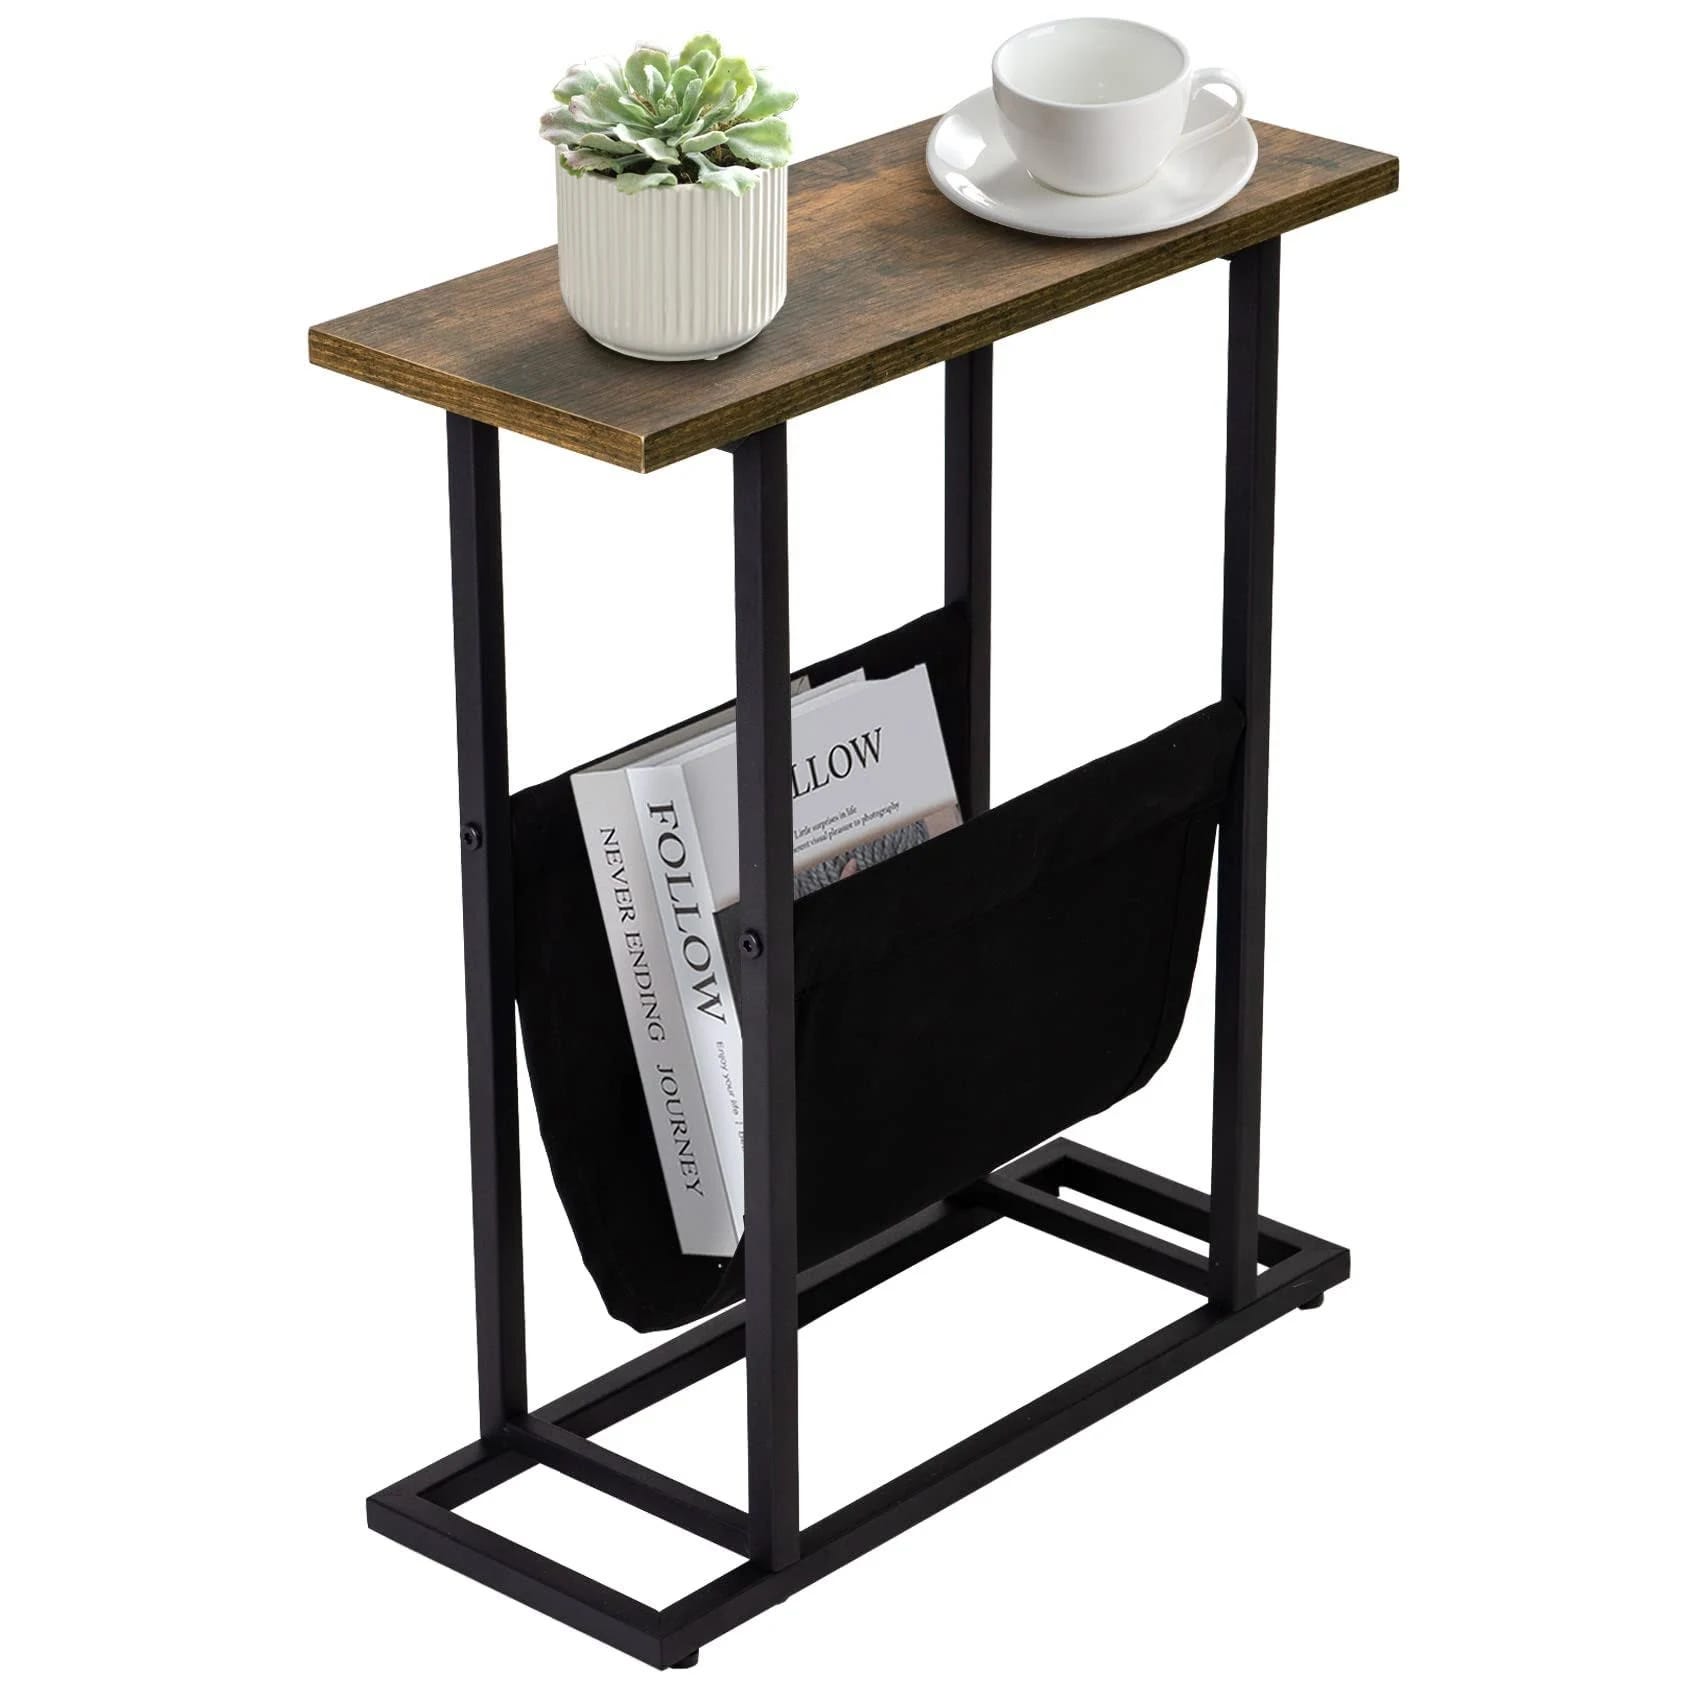 Slim End Table for Small Spaces - Narrow Nightstand with Magazine Holder | Image